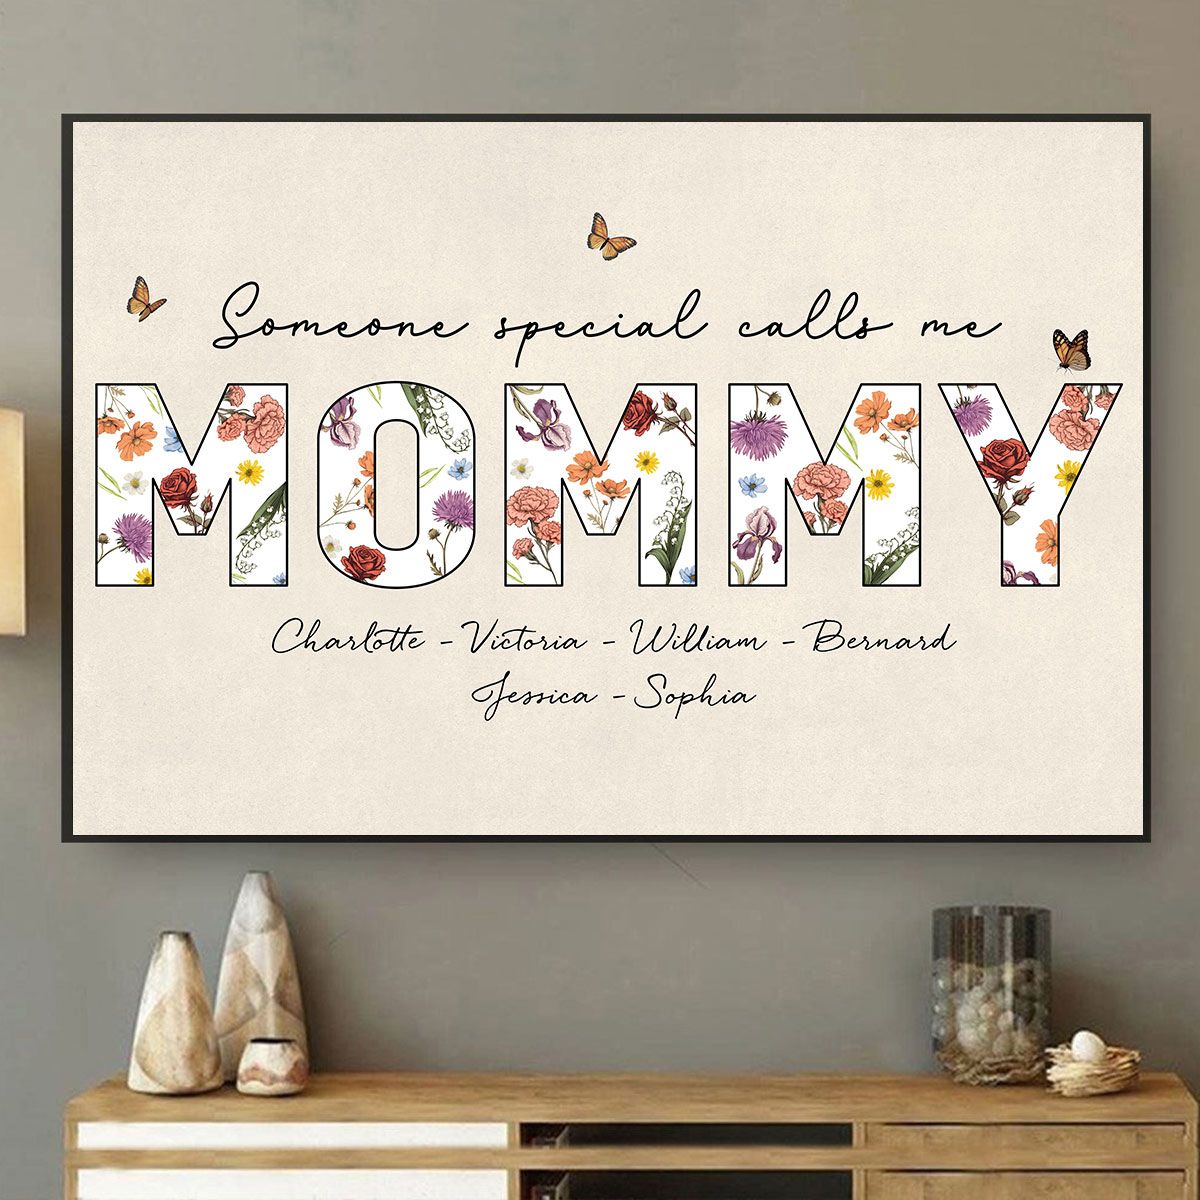 Someone Special Calls Me Grandma Personalized Poster, Birth Month Flower, Gift For Grandma